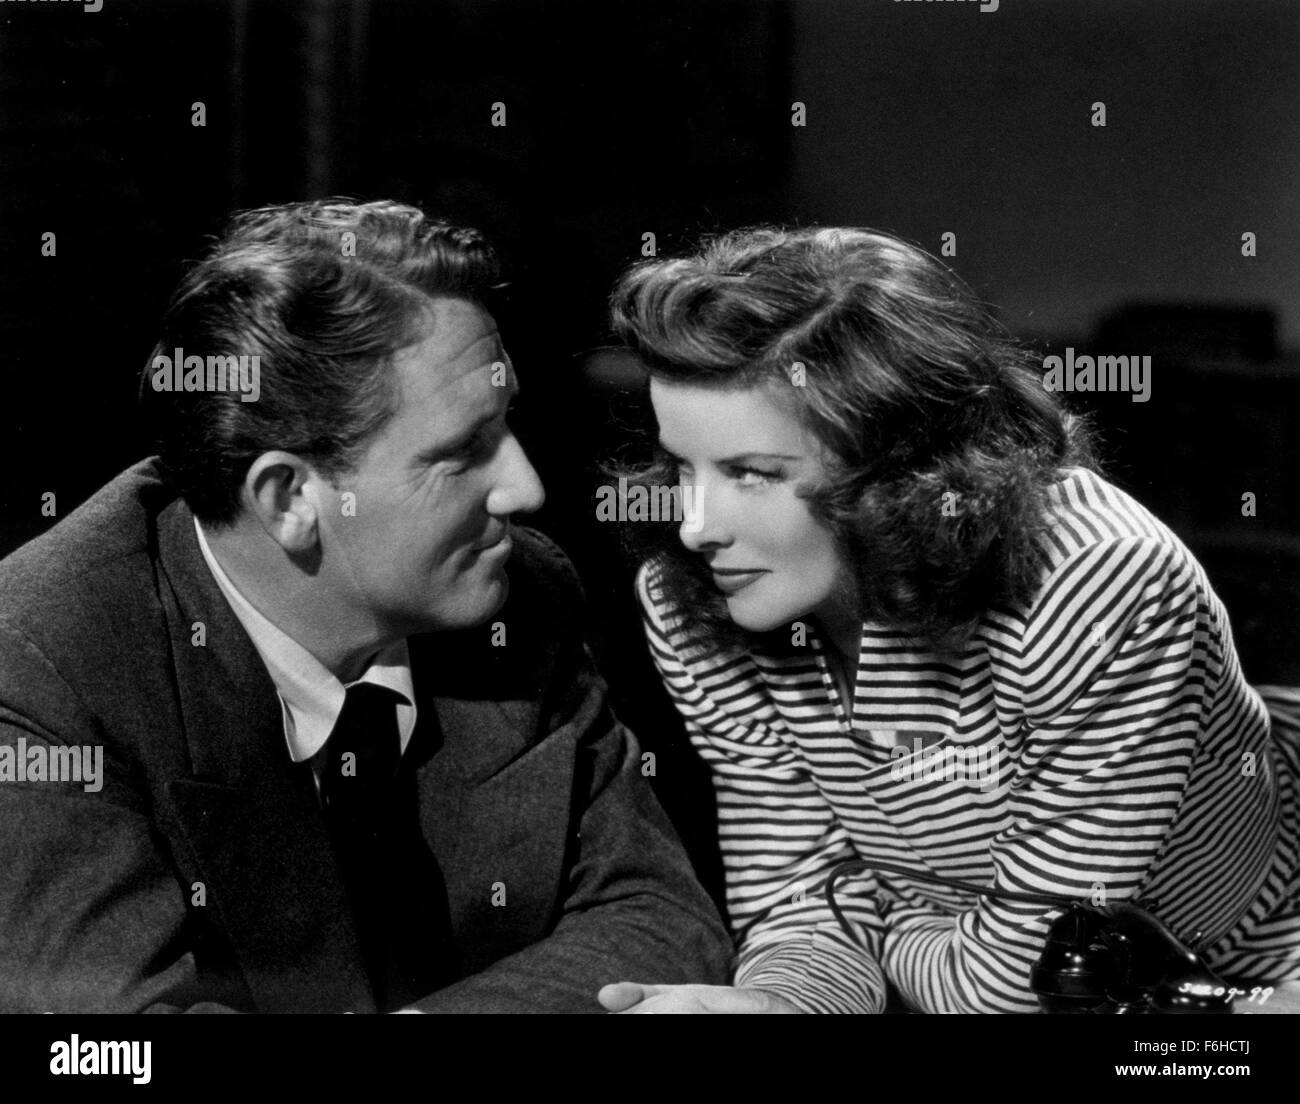 1942, Film Title: WOMAN OF THE YEAR, Director: GEORGE STEVENS, Studio: MGM, Pictured: 1942, KATHARINE HEPBURN, GEORGE STEVENS, SPENCER TRACY, GAZE. (Credit Image: SNAP) Stock Photo